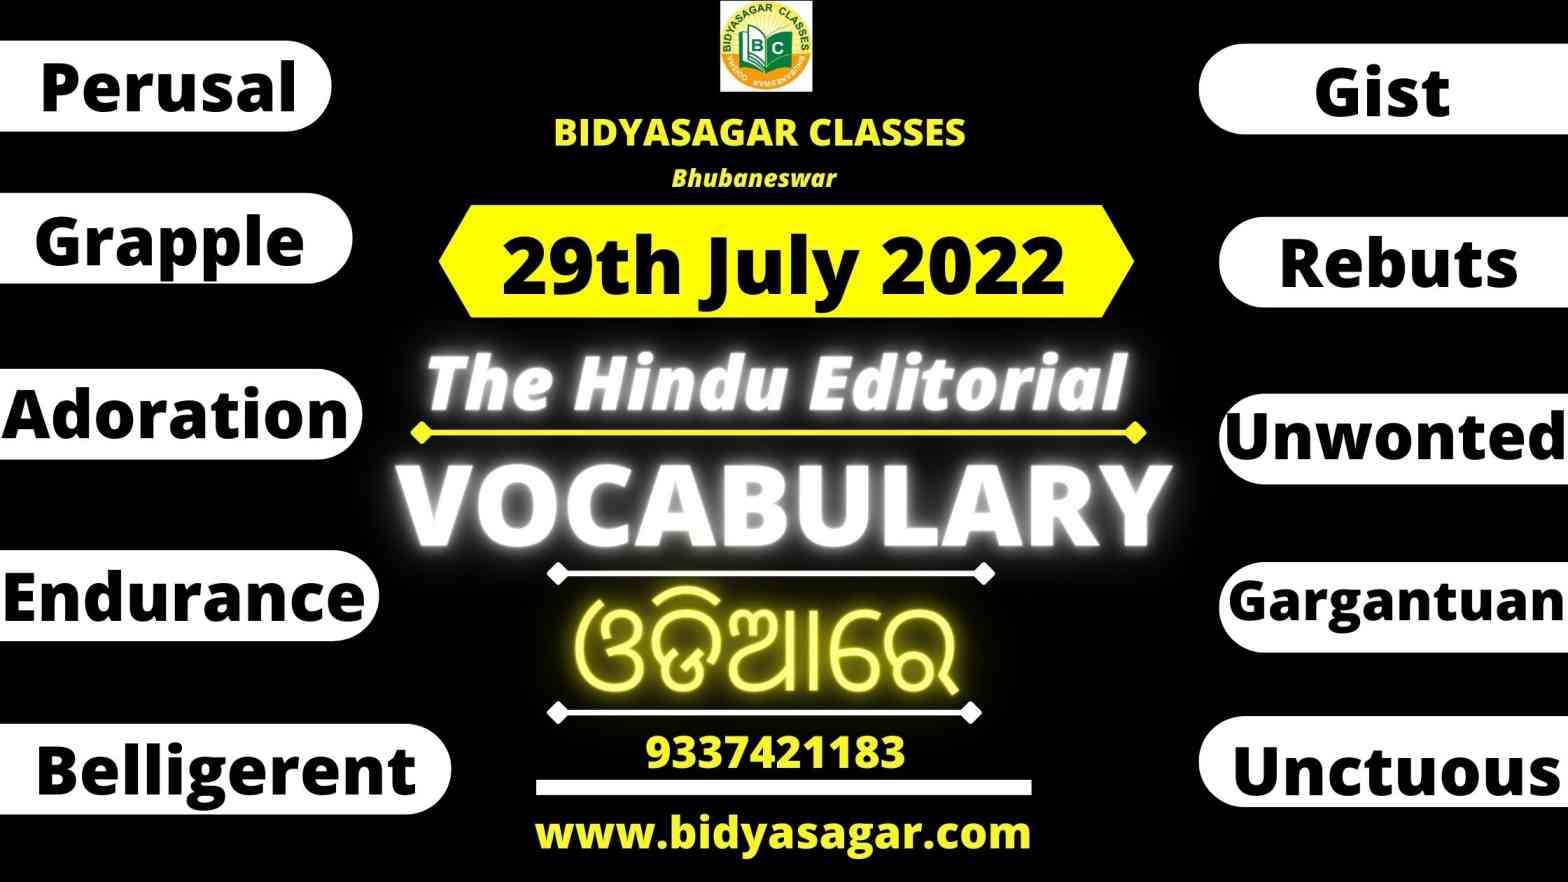 The Hindu Editorial Vocabulary of 29th July 2022